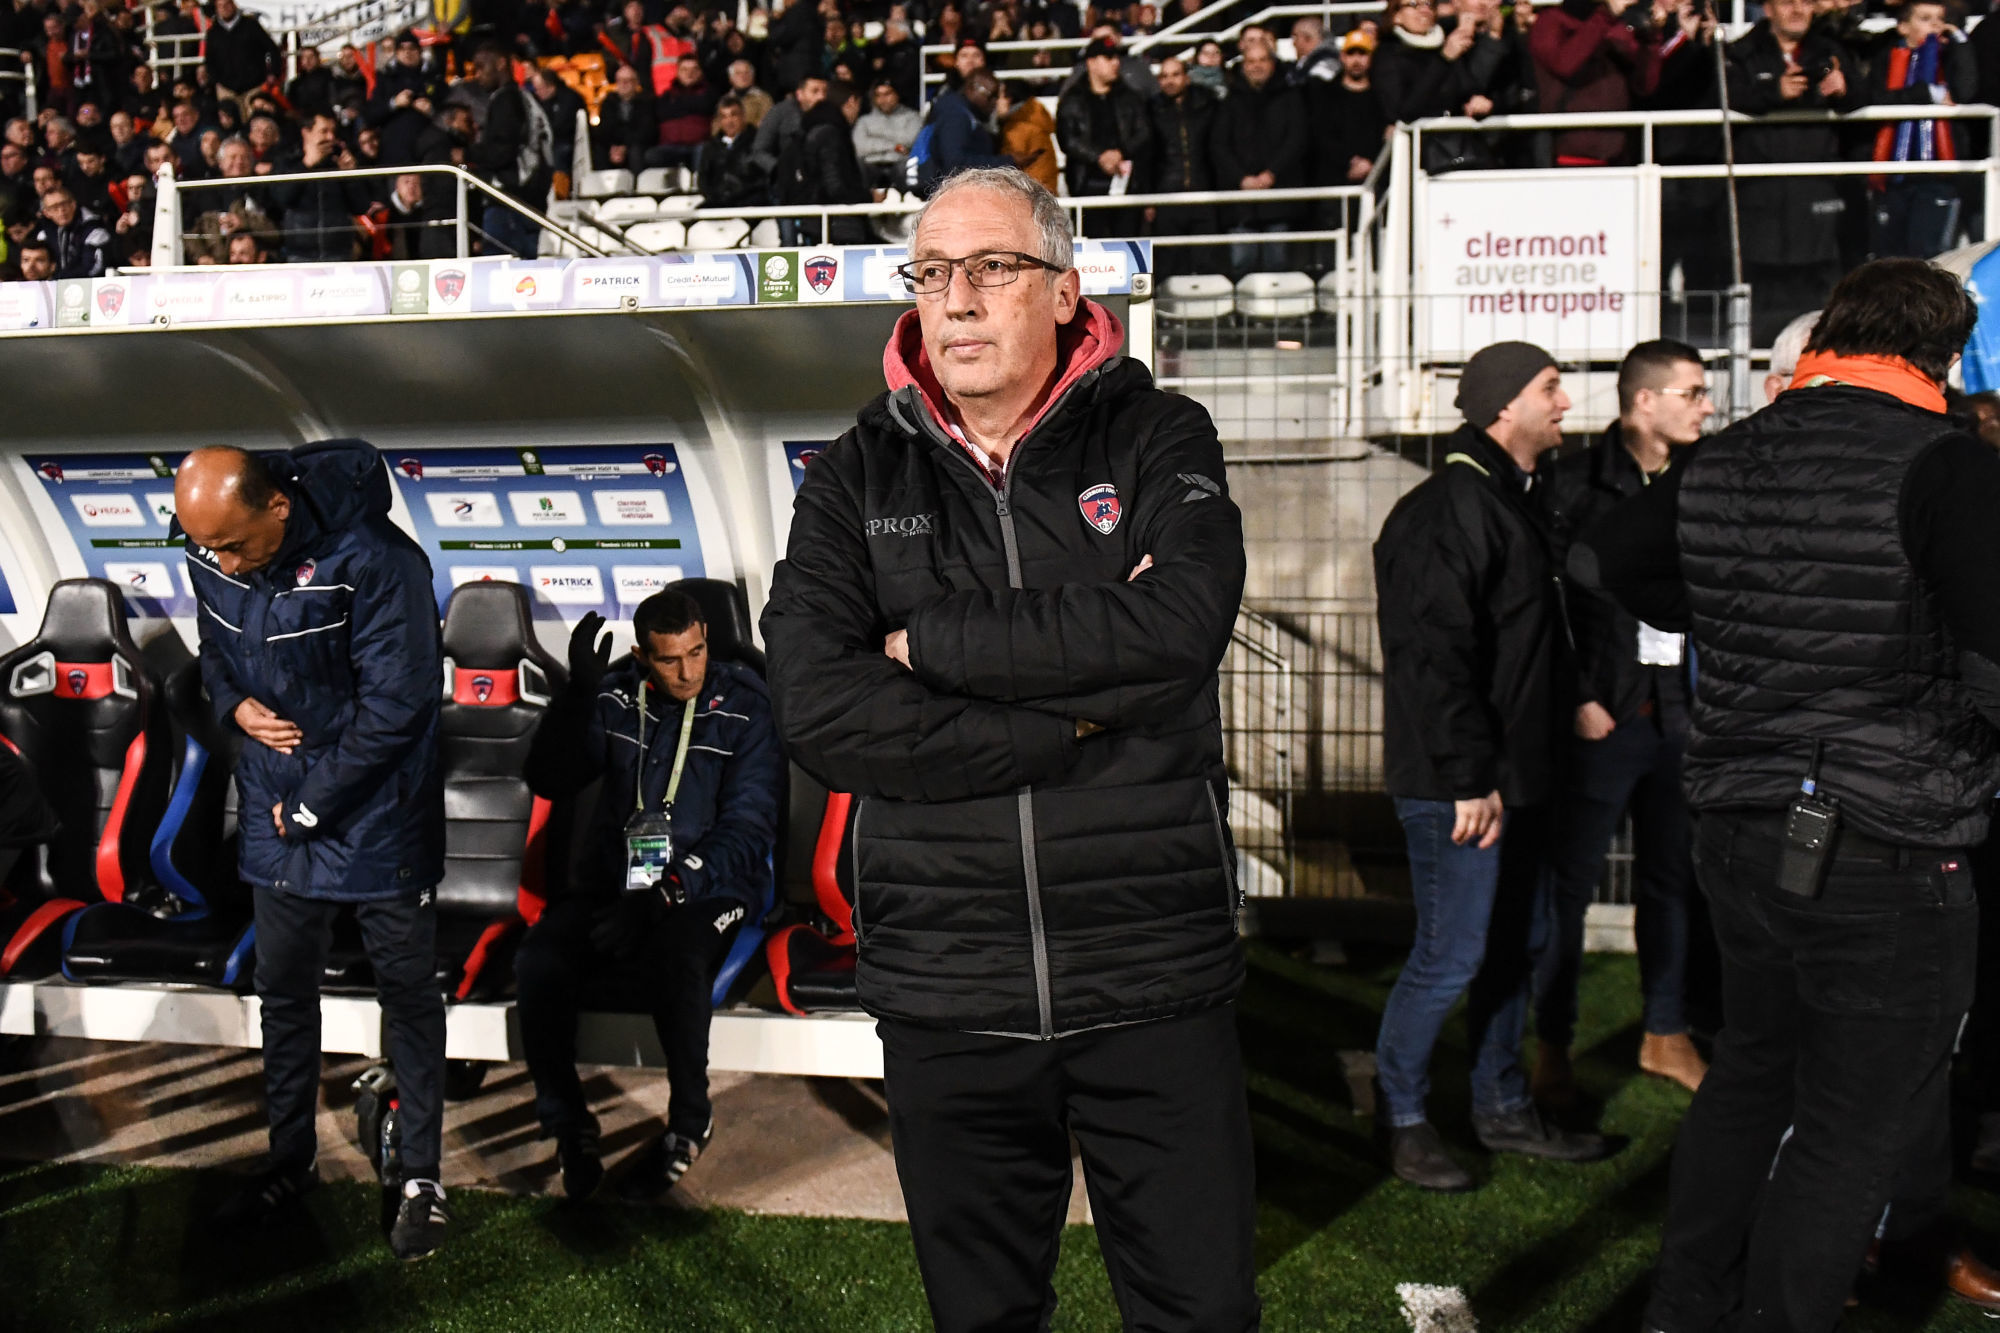 Pascal GASTIEN coach of Clermont during the Ligue 2 match between Clermont Foot 63 and Paris FC on February 21, 2020 in Clermont-Ferrand, France. (Photo by Anthony Dibon/Icon Sport) - Pascal GASTIEN - Clermont Ferrand (France)